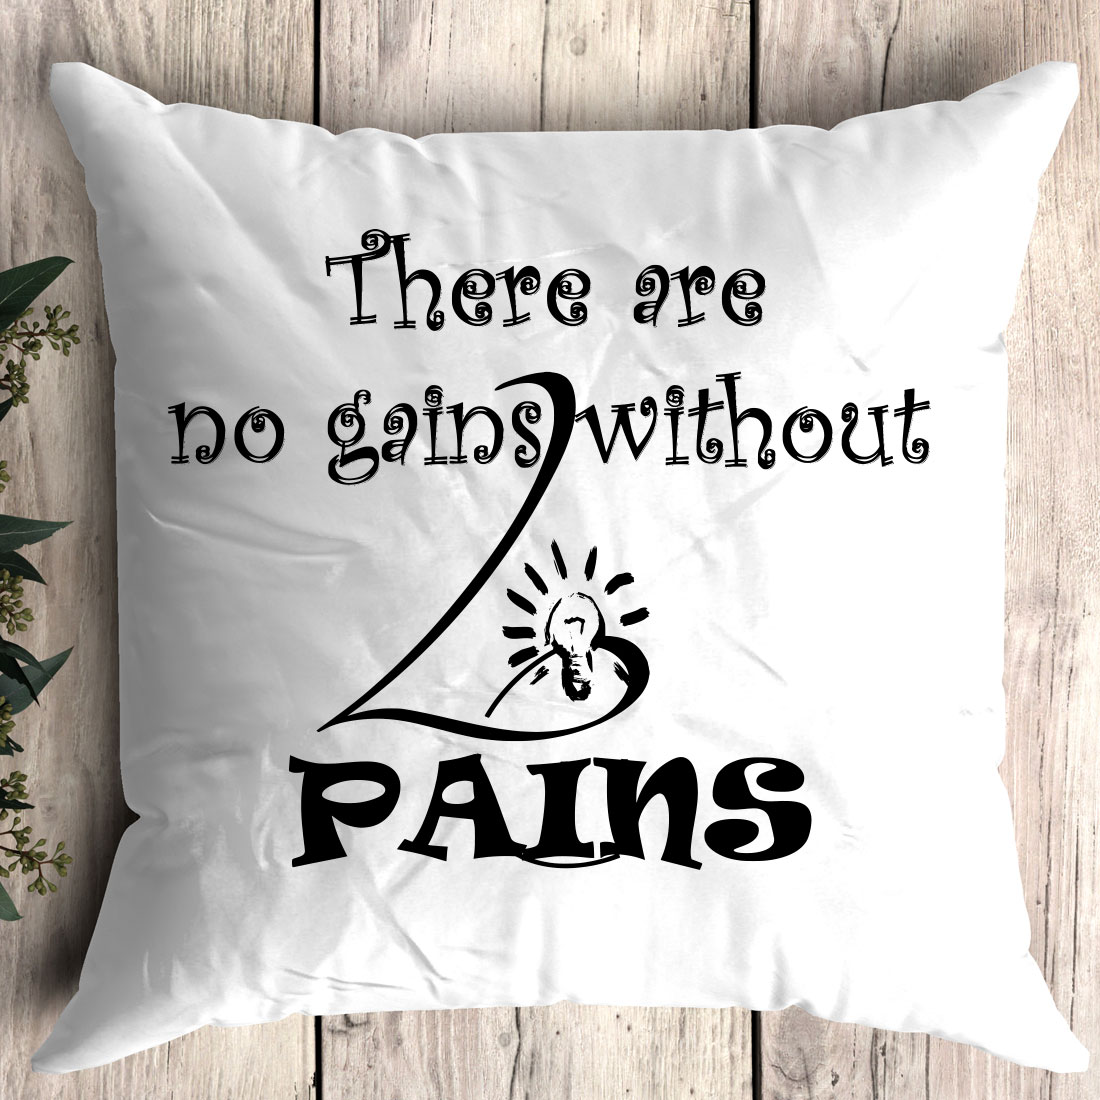 There are no gins without pain pillow.